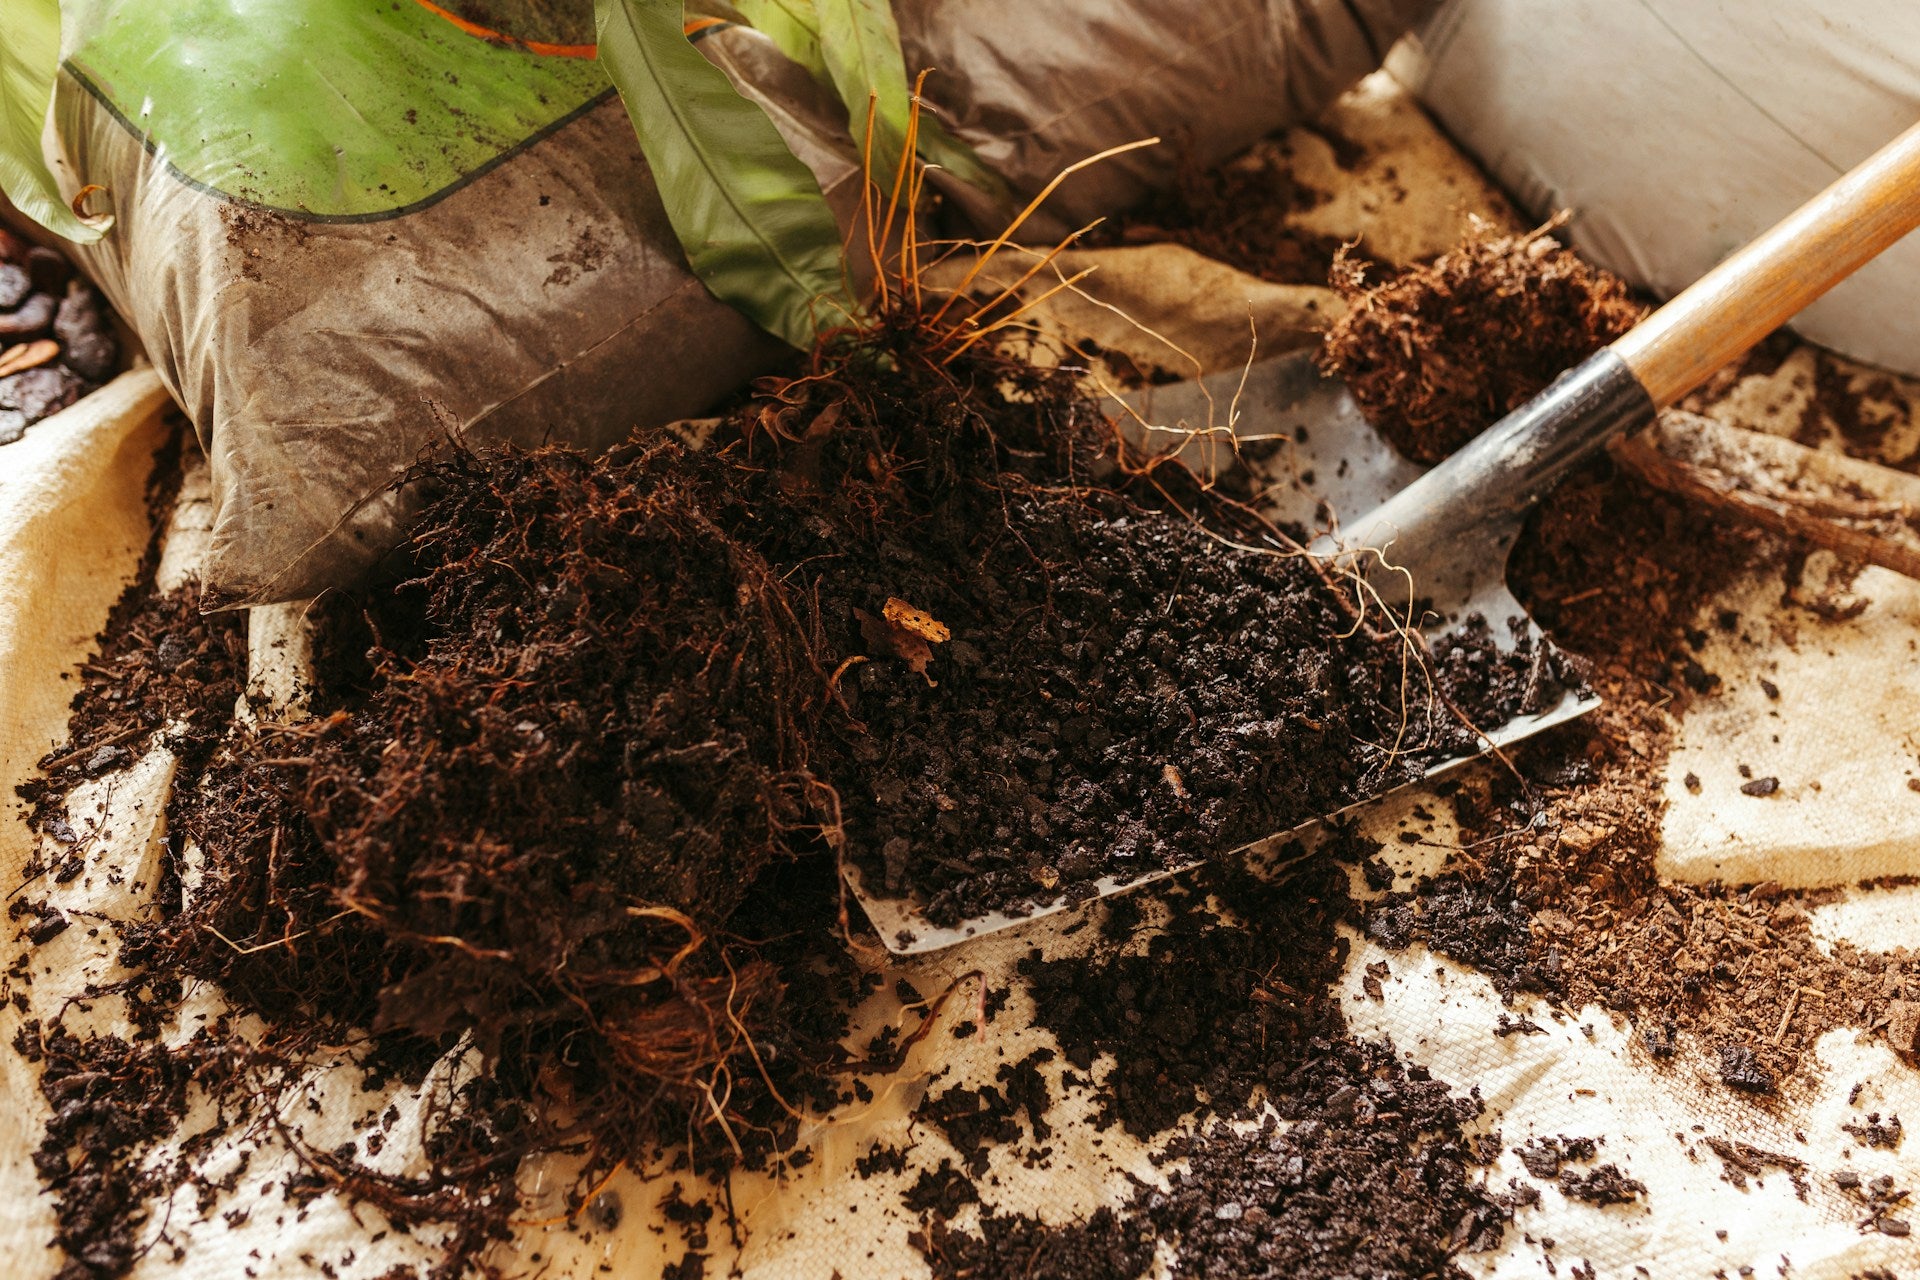 Rich dark soil scattered on a table with trowel